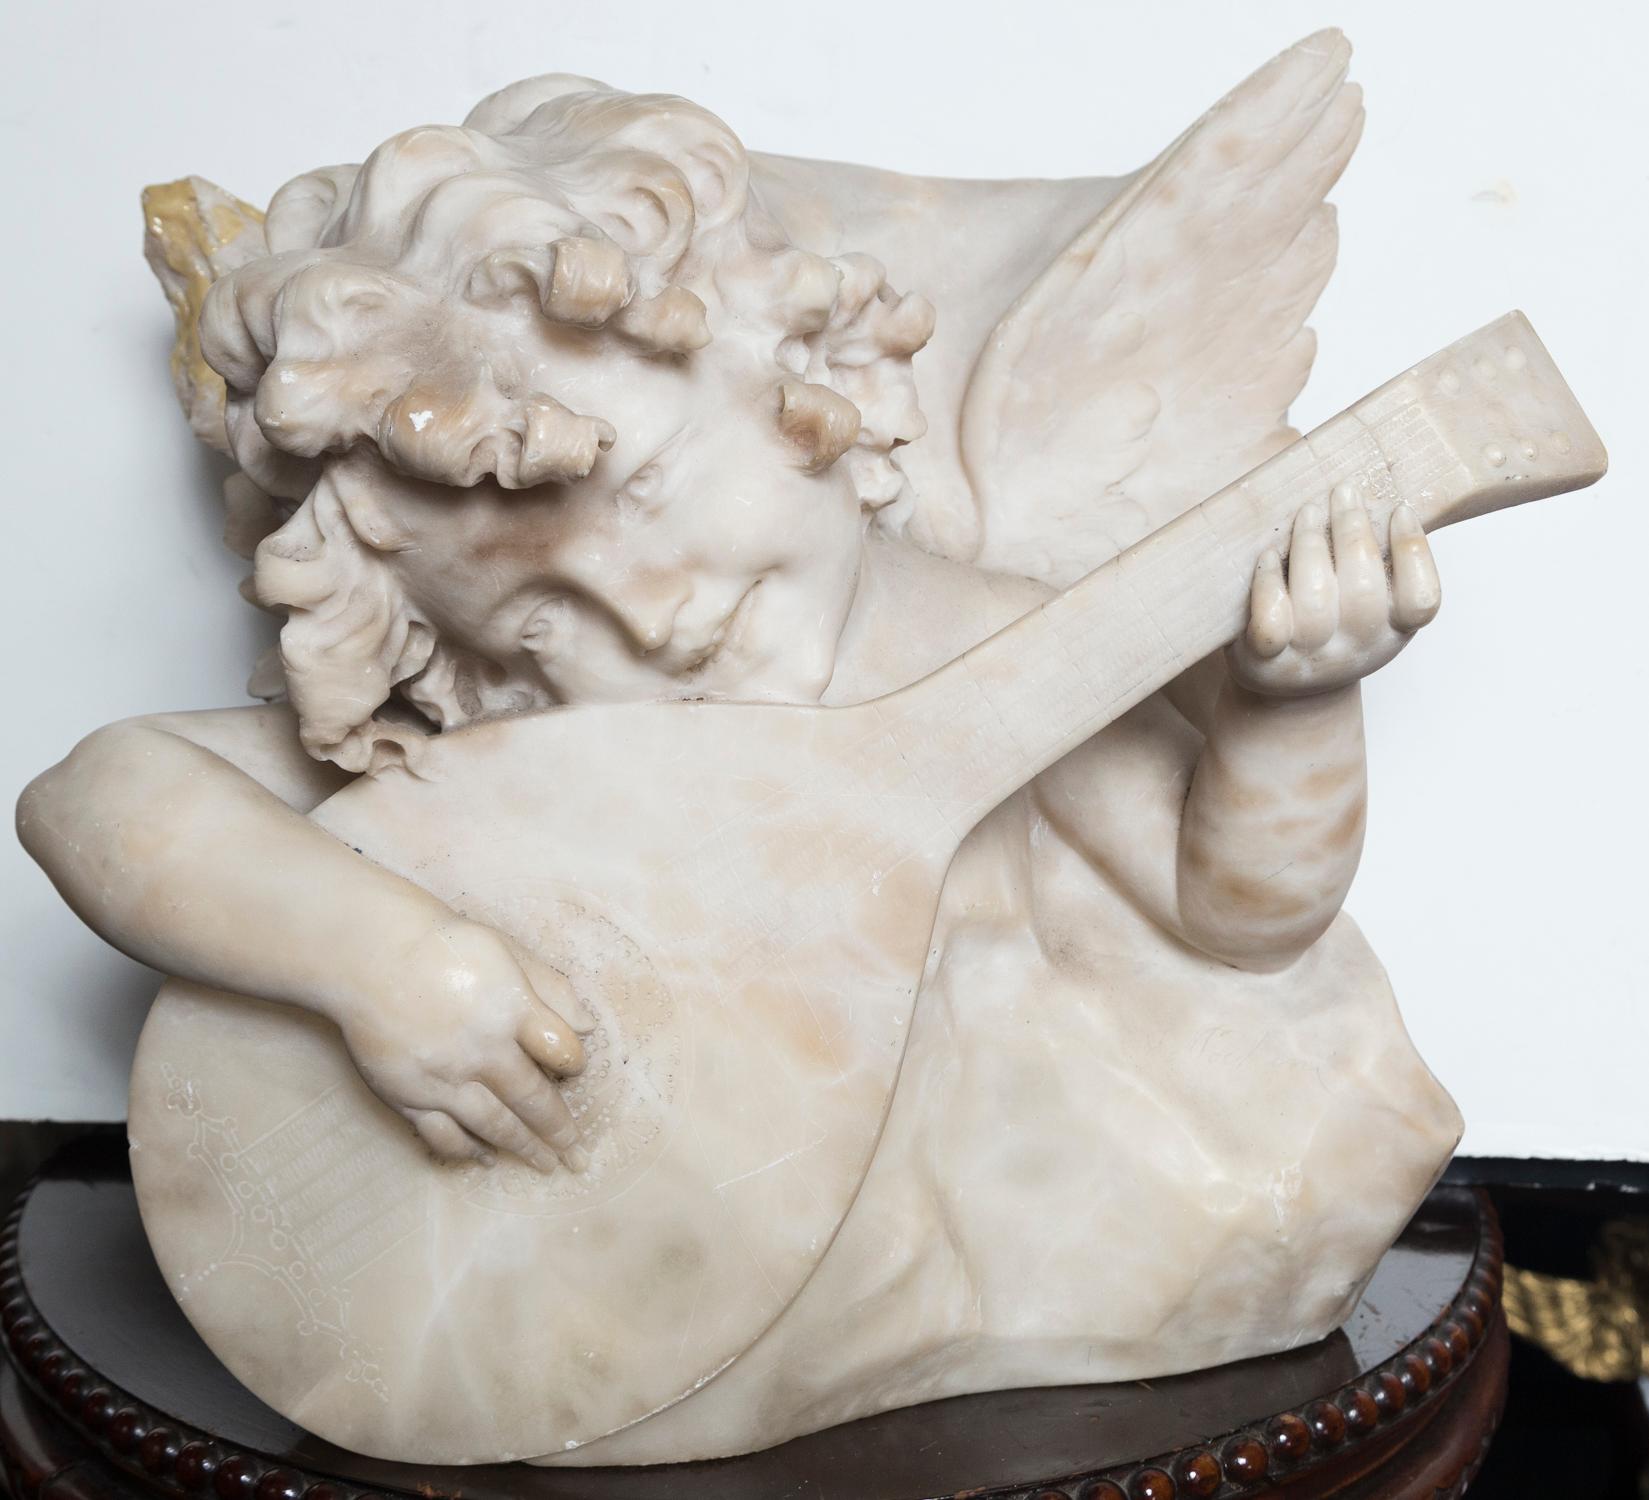 The whole carved from a single piece of white marble, in deep relief. The putto has wings and is playing a mandolin. His curly hair and smiling face very well carved. Damage to the left wing (facing the viewer) has been filled and the fill has